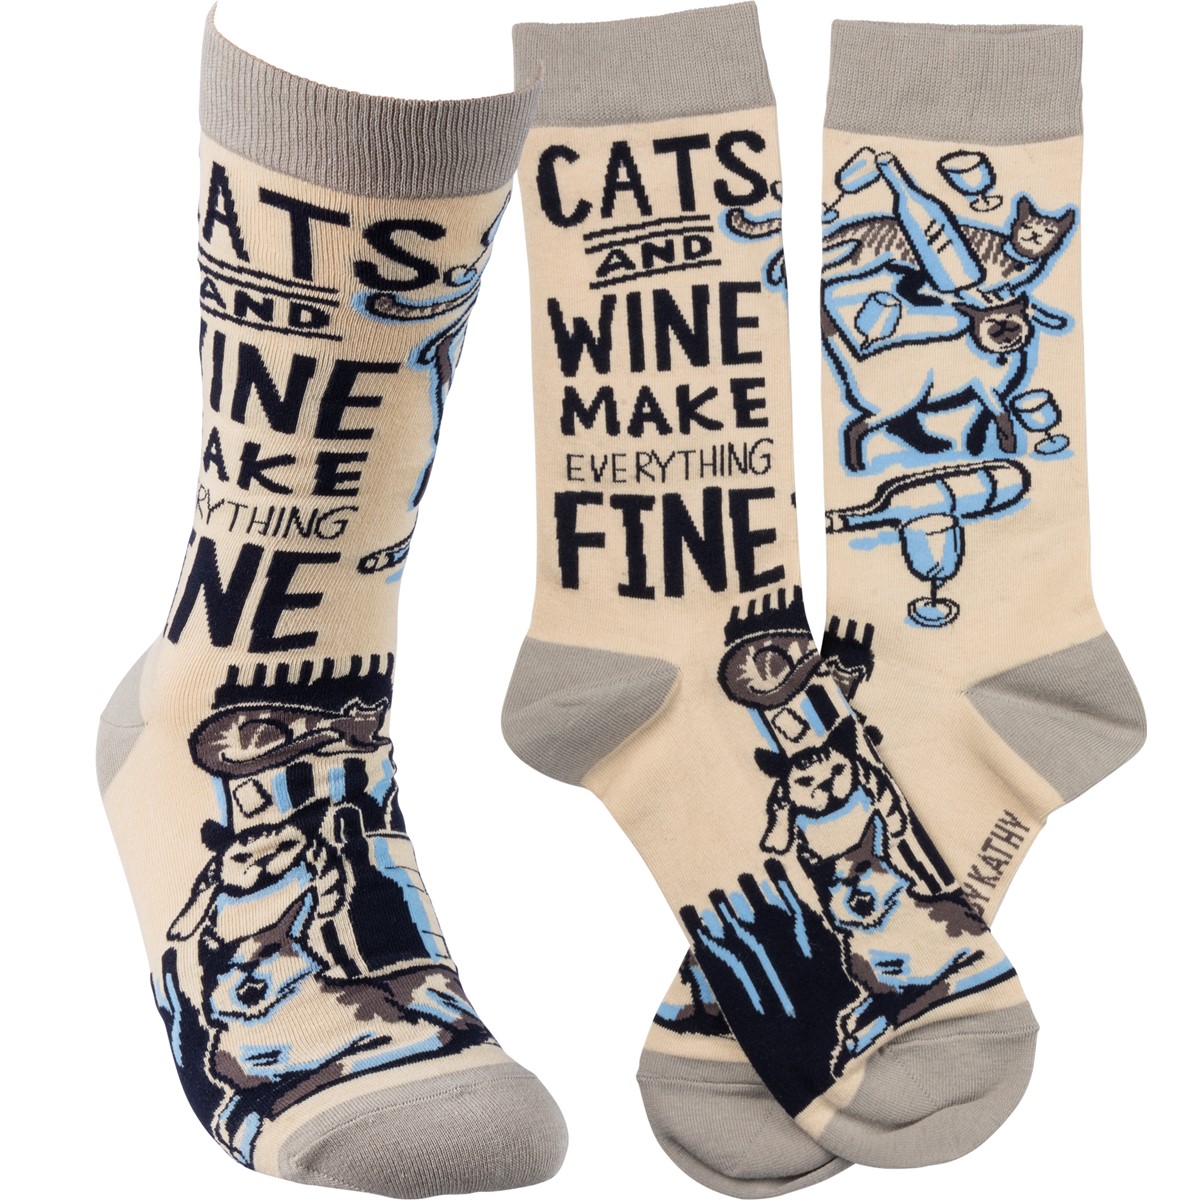 Cats And Wine Everything Fine Socks - Cotton, Nylon, Spandex